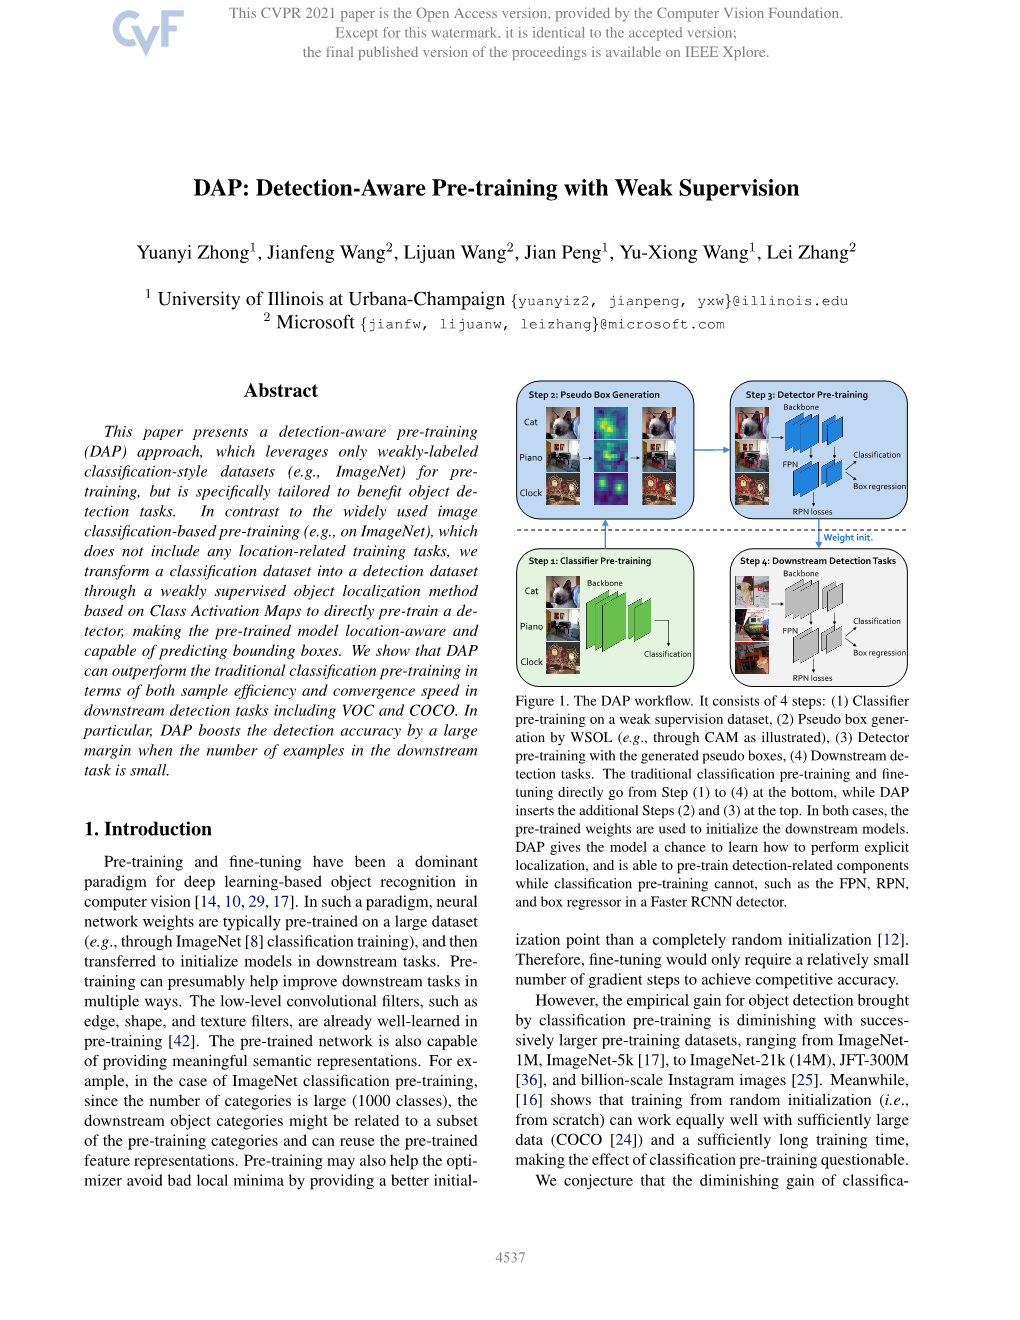 DAP: Detection-Aware Pre-Training with Weak Supervision